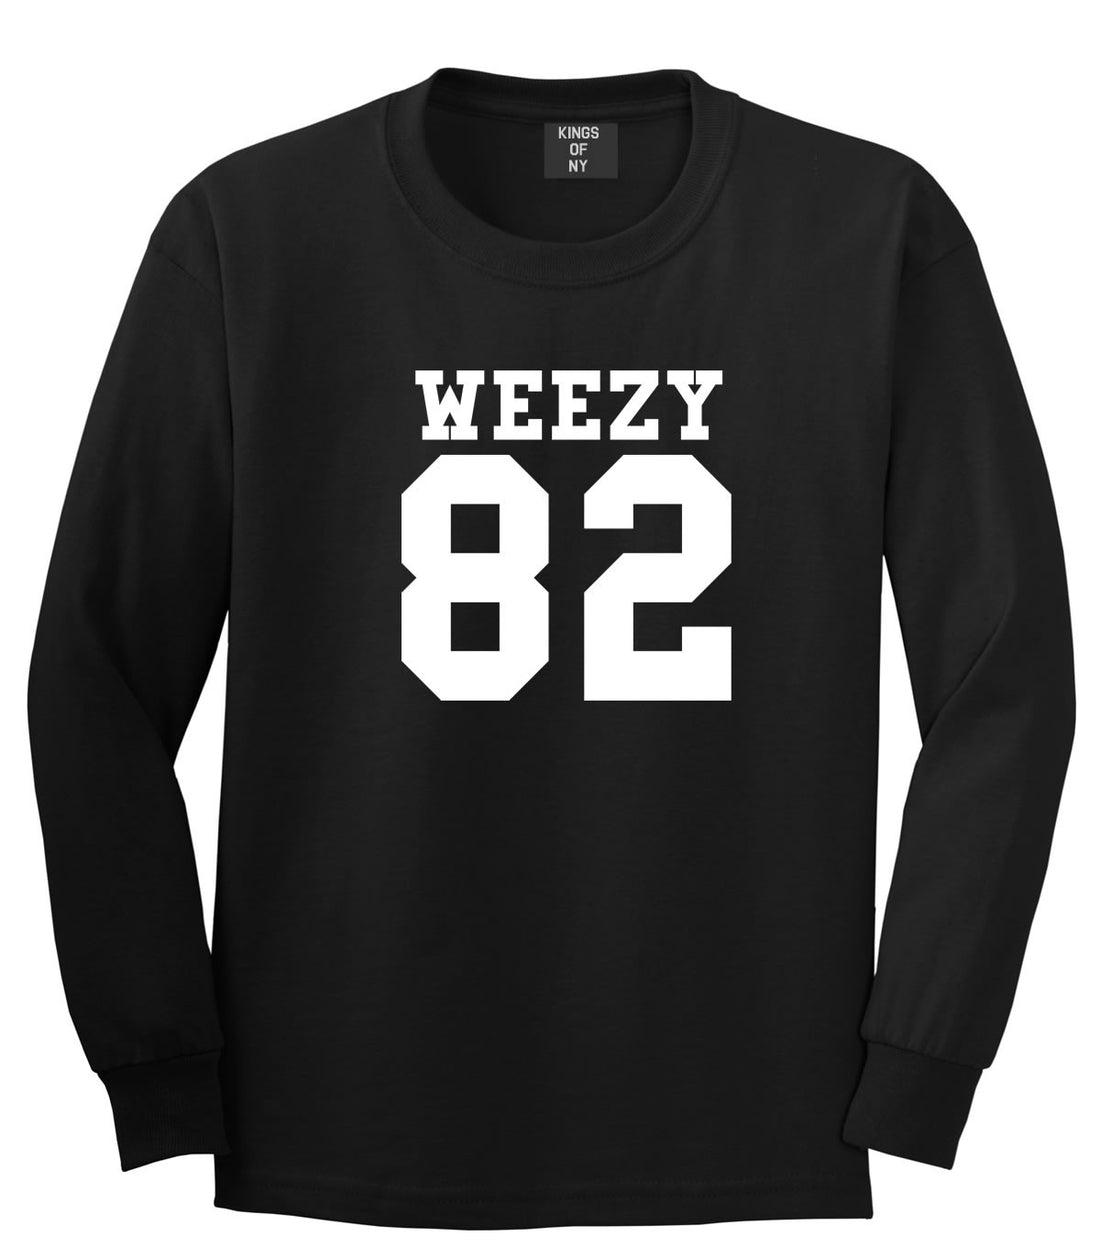 Weezy 82 Team Long Sleeve T-Shirt in Black by Kings Of NY